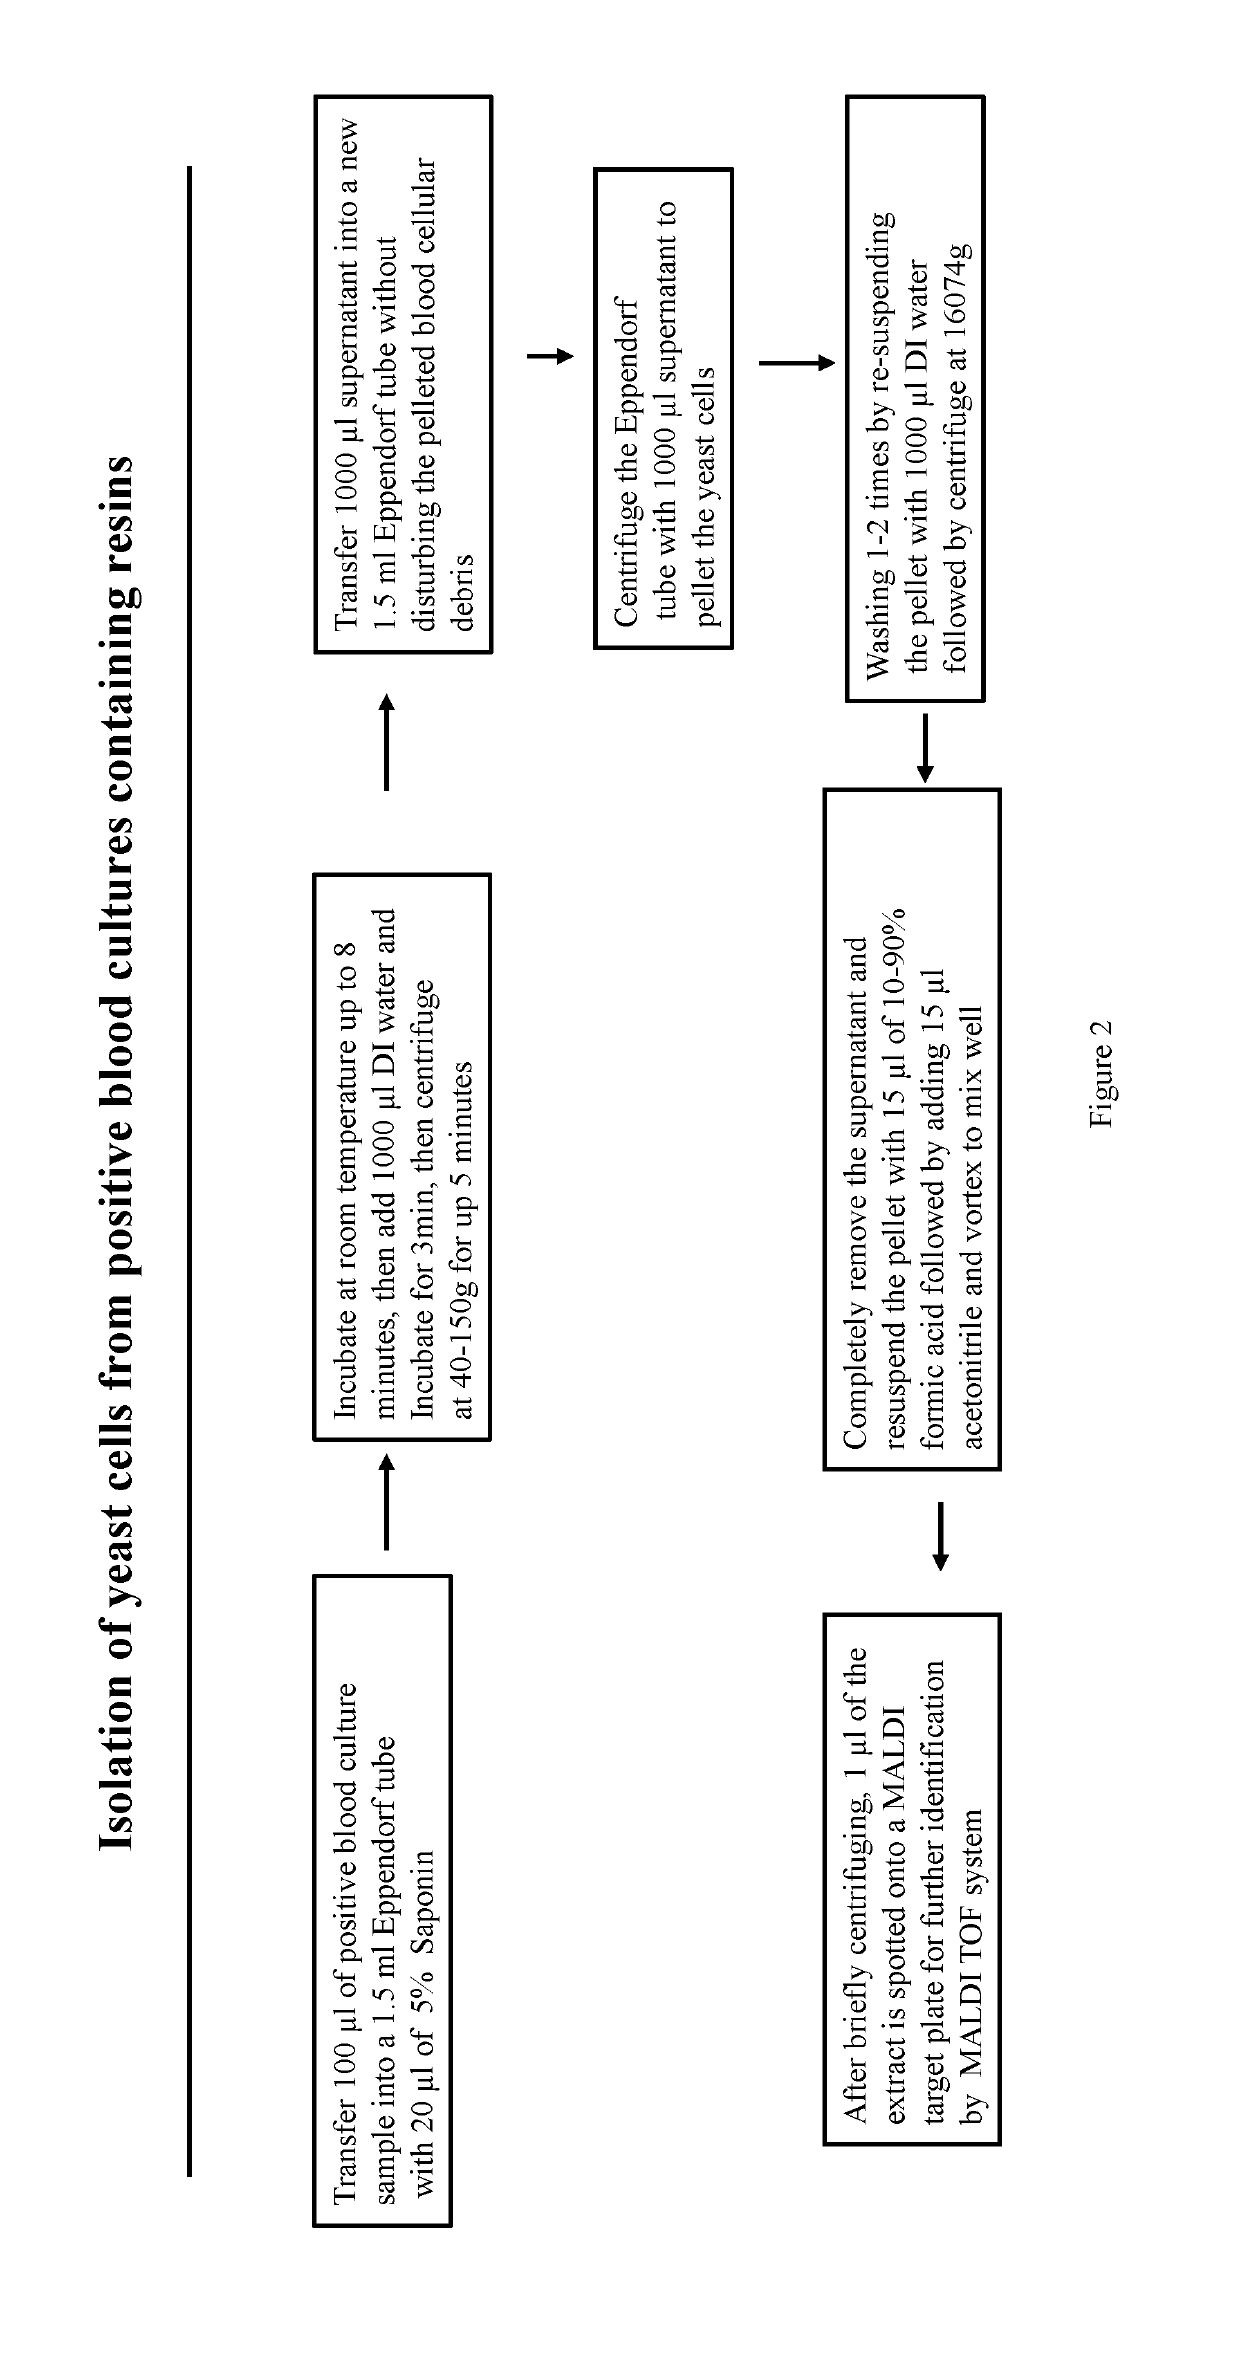 Method for rapid and direct identification of microbial pathogen from positive culture sterile body fluids using mass spectrometry